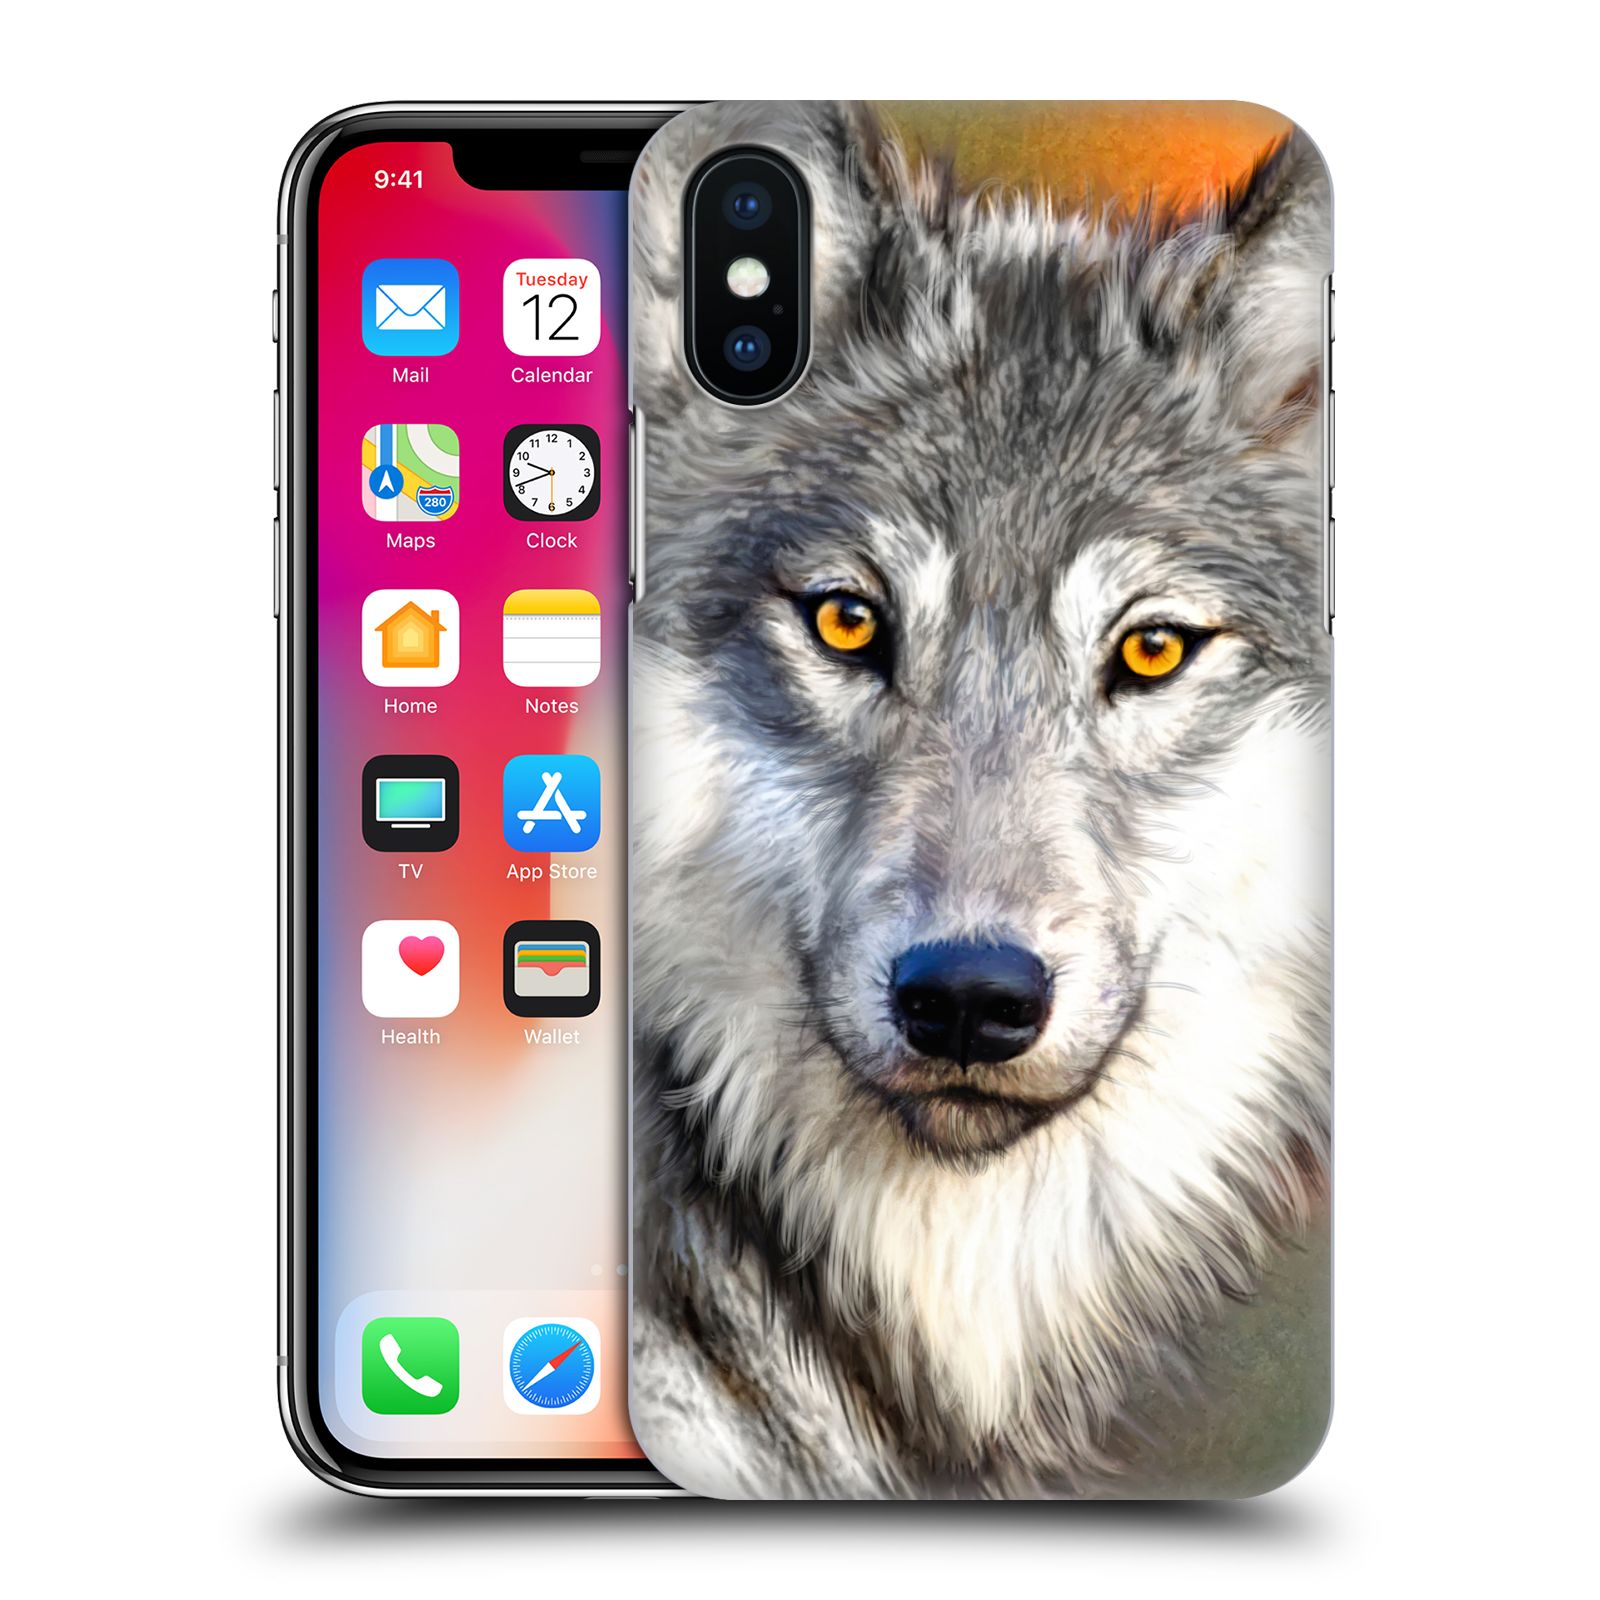 Zadní obal pro mobil Apple Iphone X / XS - HEAD CASE - Aimee Stewart - Pohled Vlka